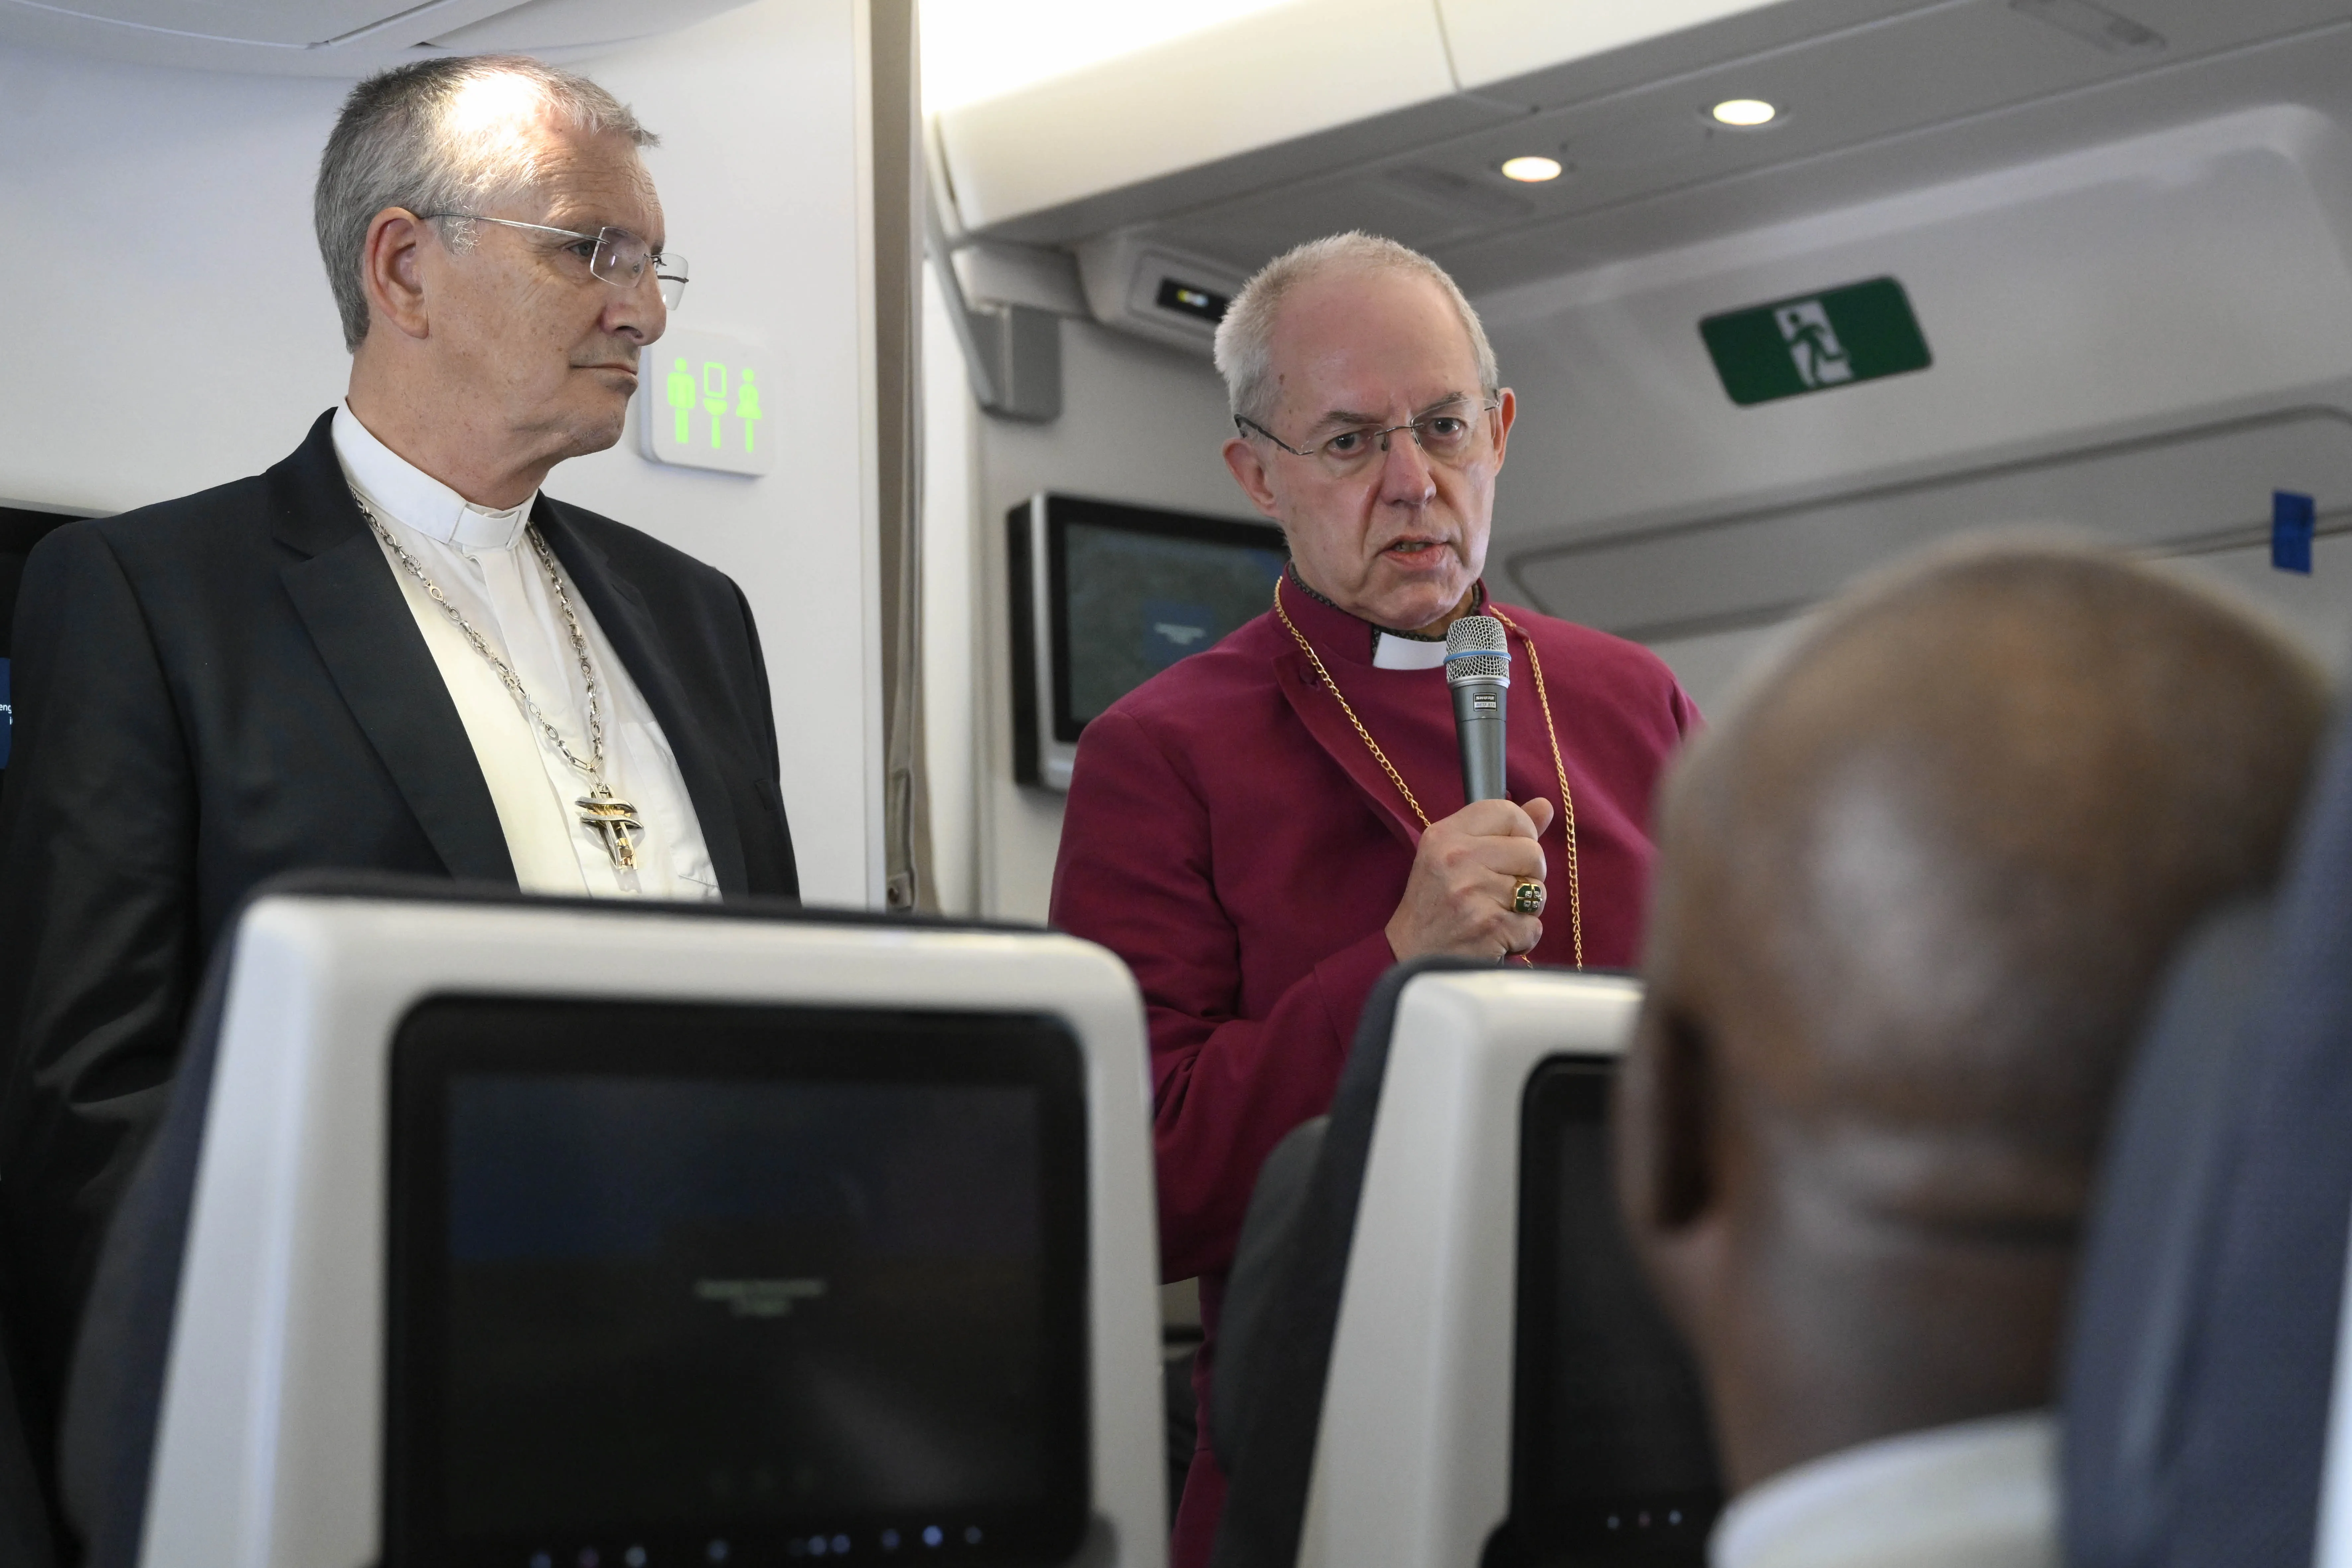 Justin Welby, archbishop of Canterbury, speaks to reporters aboard the papal flight to Rome on Feb. 5, 2023, as Iain Greenshields, moderator of the General Assembly of the Church of Scotland, looks on. The two religious leaders accompanied Pope Francis on his visit to South Sudan. Vatican Media